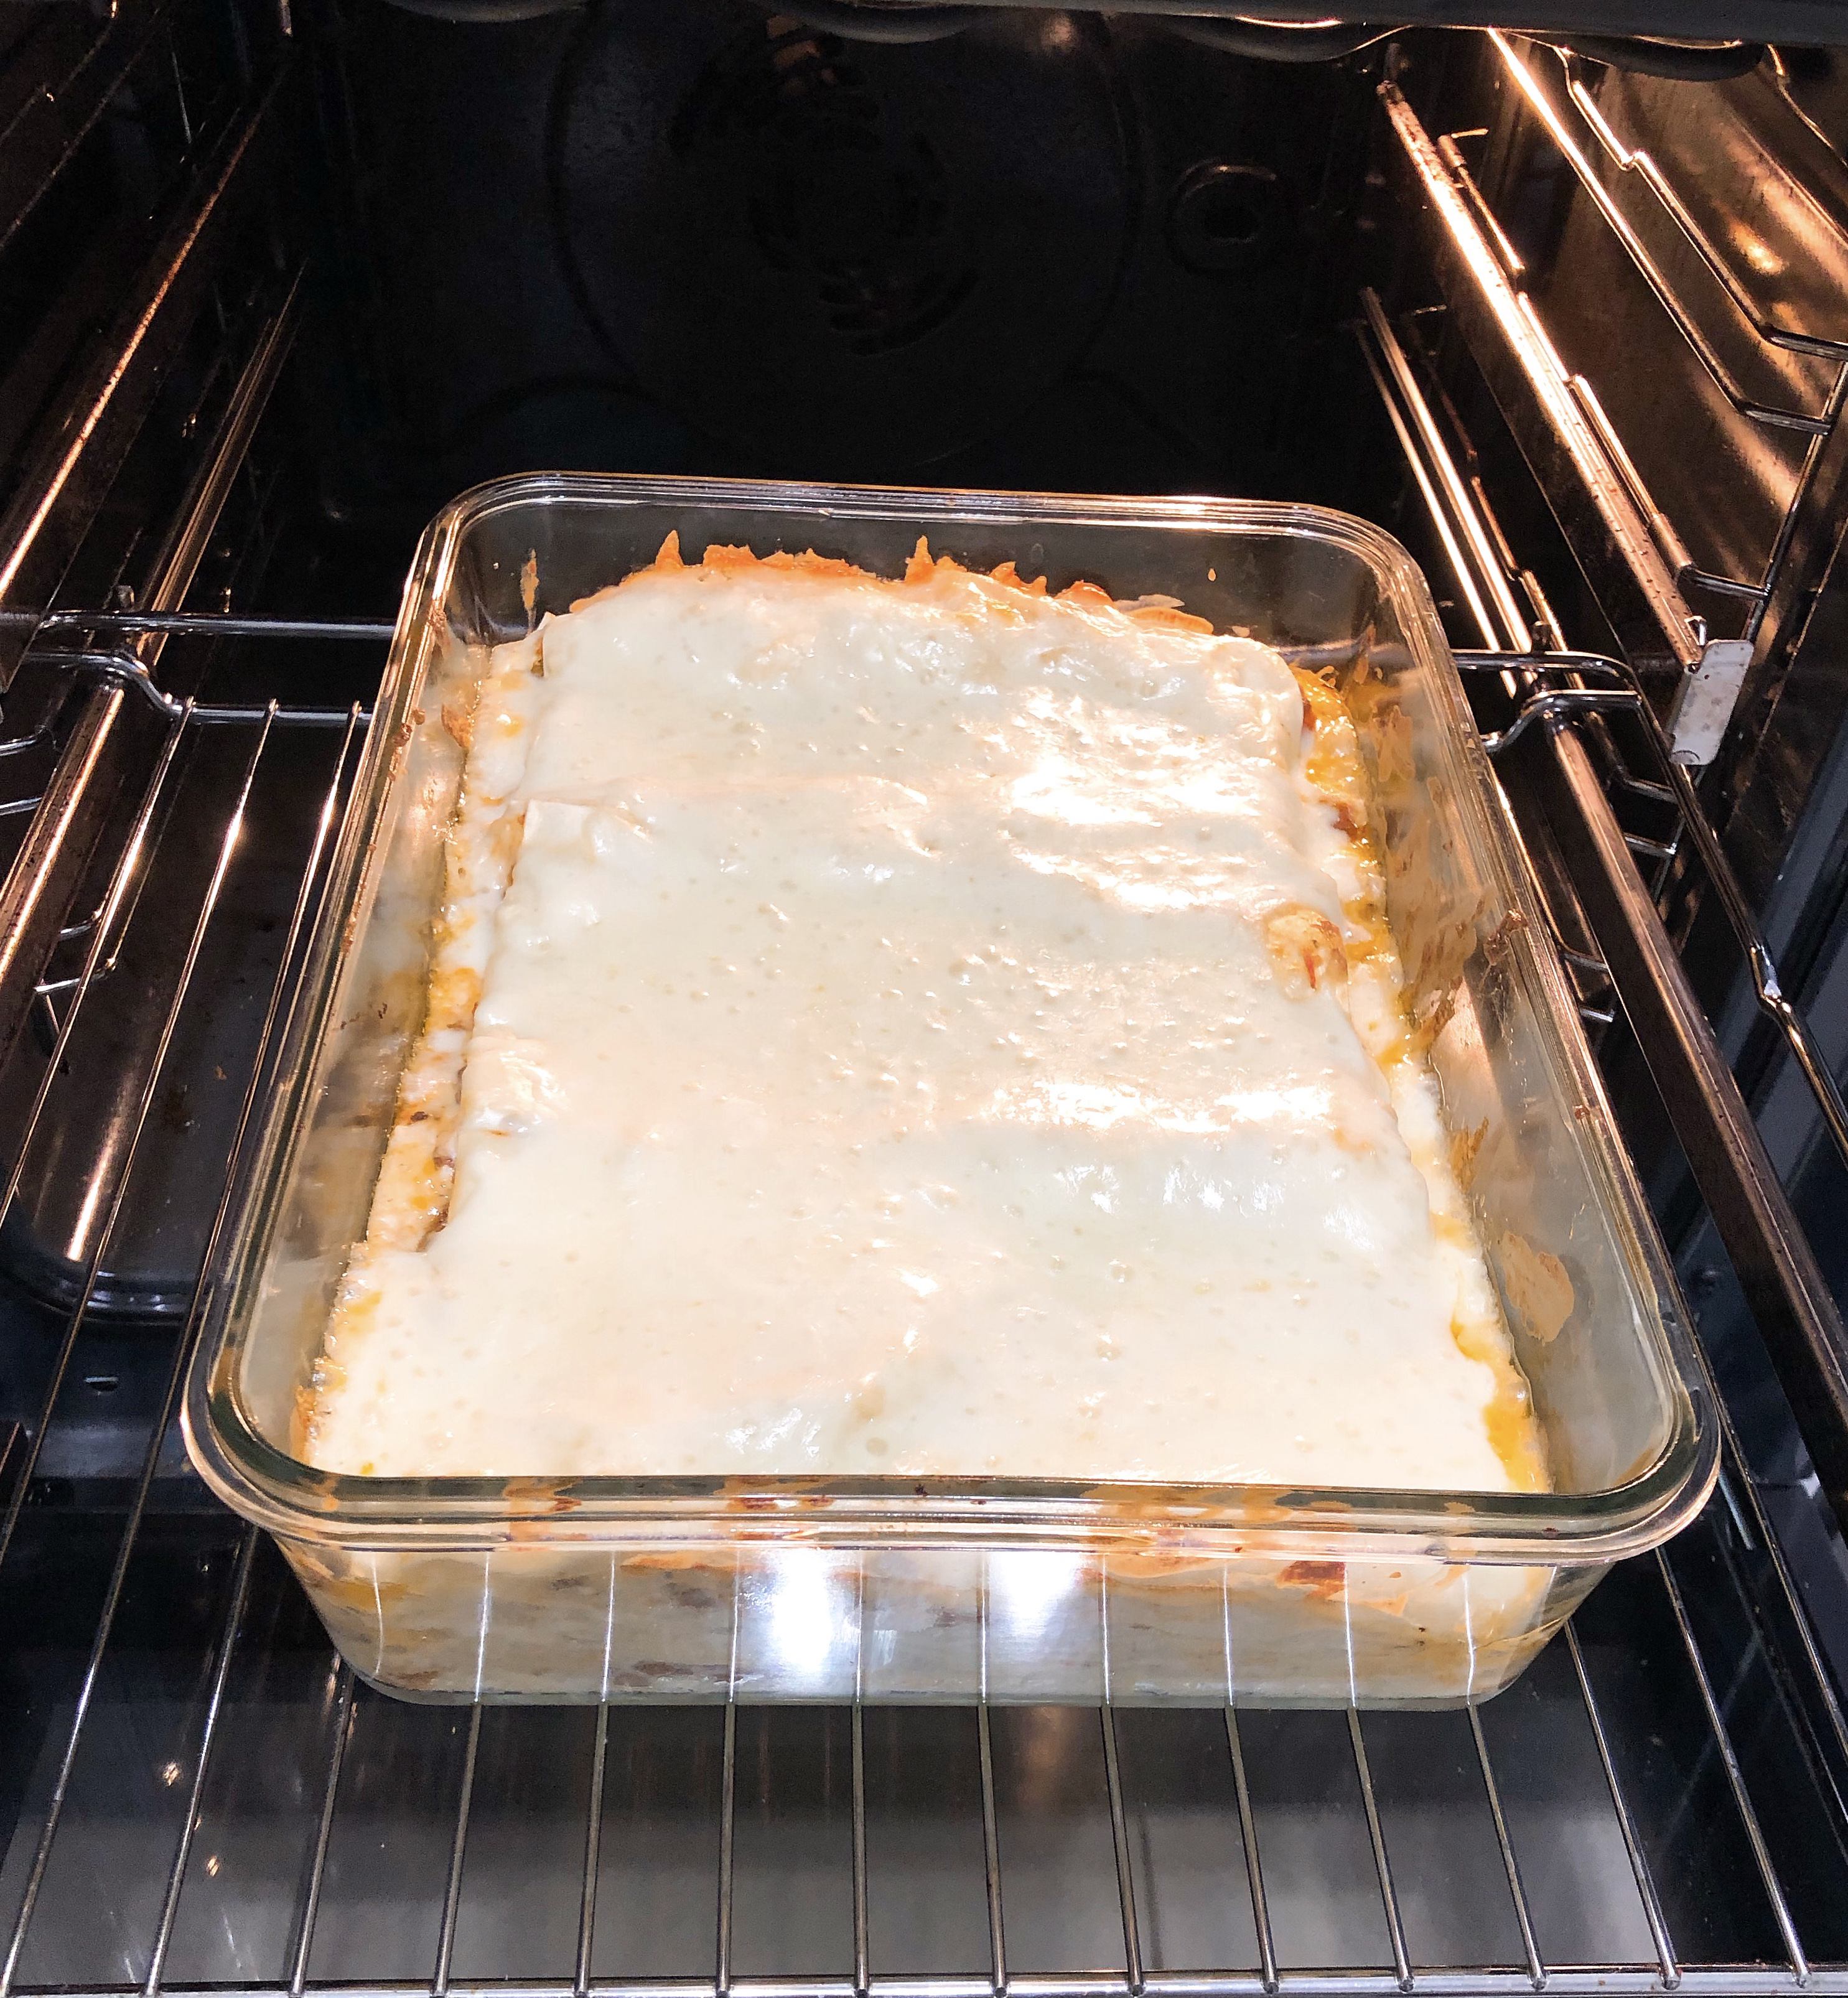 Lasagna in the oven